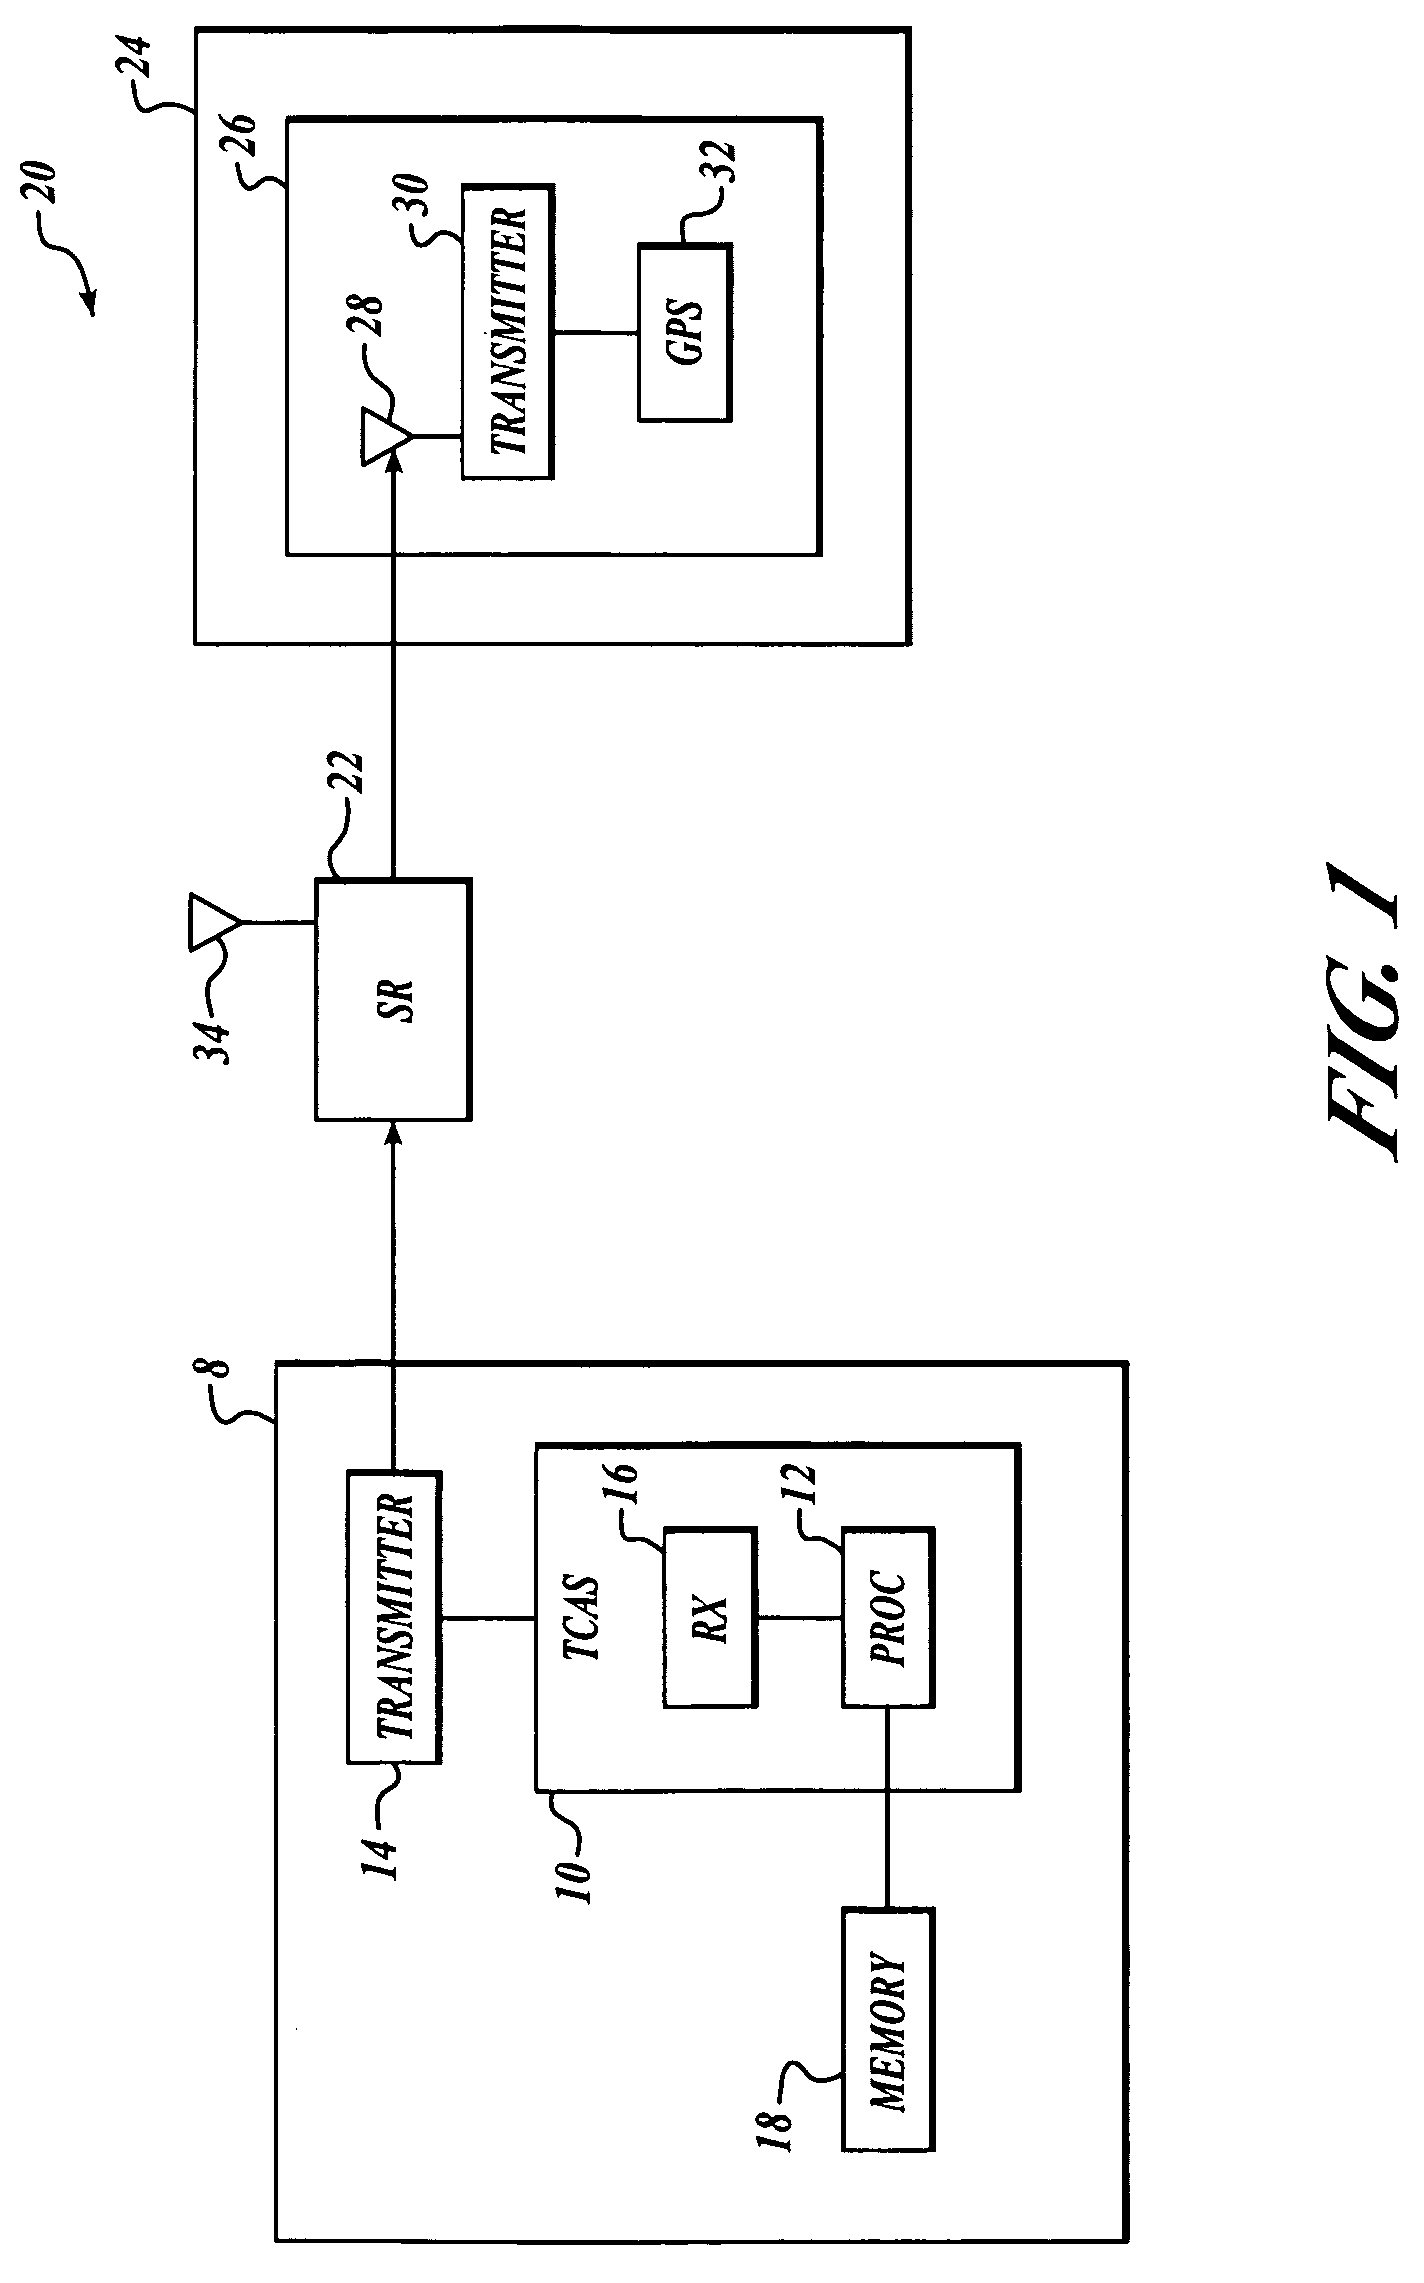 Traffic alert collision avoidance system (TCAS) devices and methods